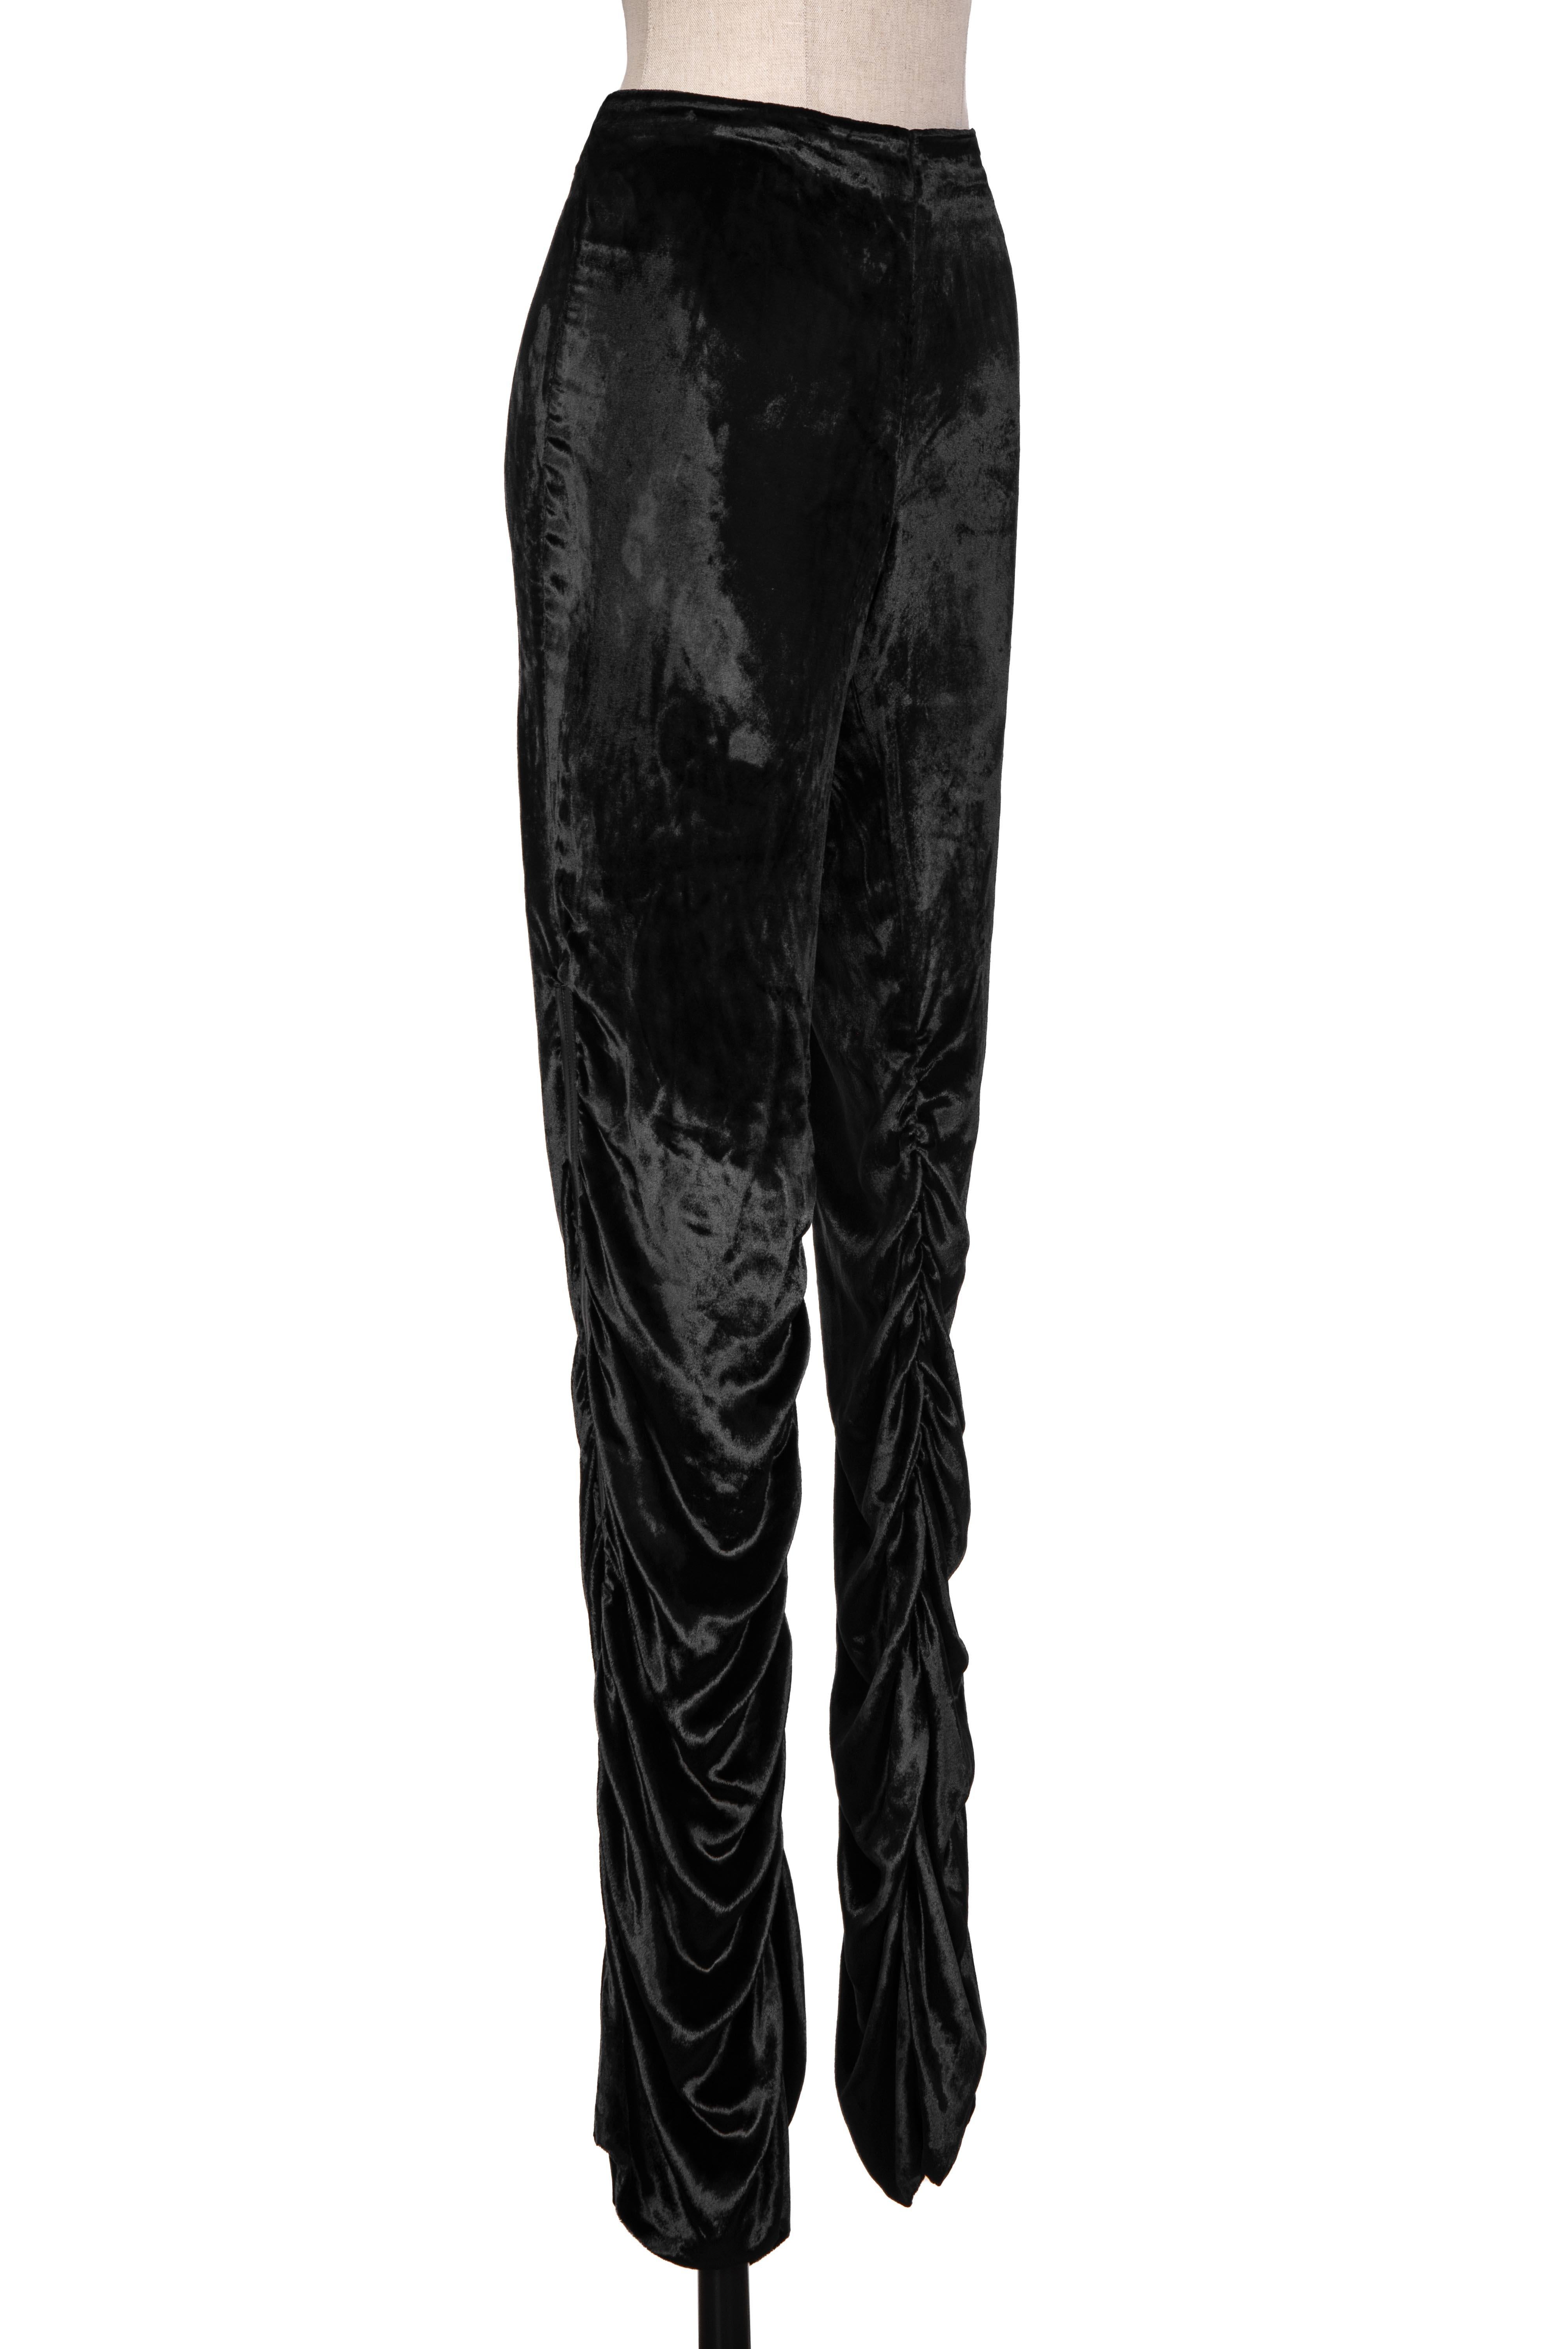 Fall 1999 GUCCI Tom Ford Documented Draped Black Velvet Leather Strip Trousers In Excellent Condition For Sale In Munich, DE